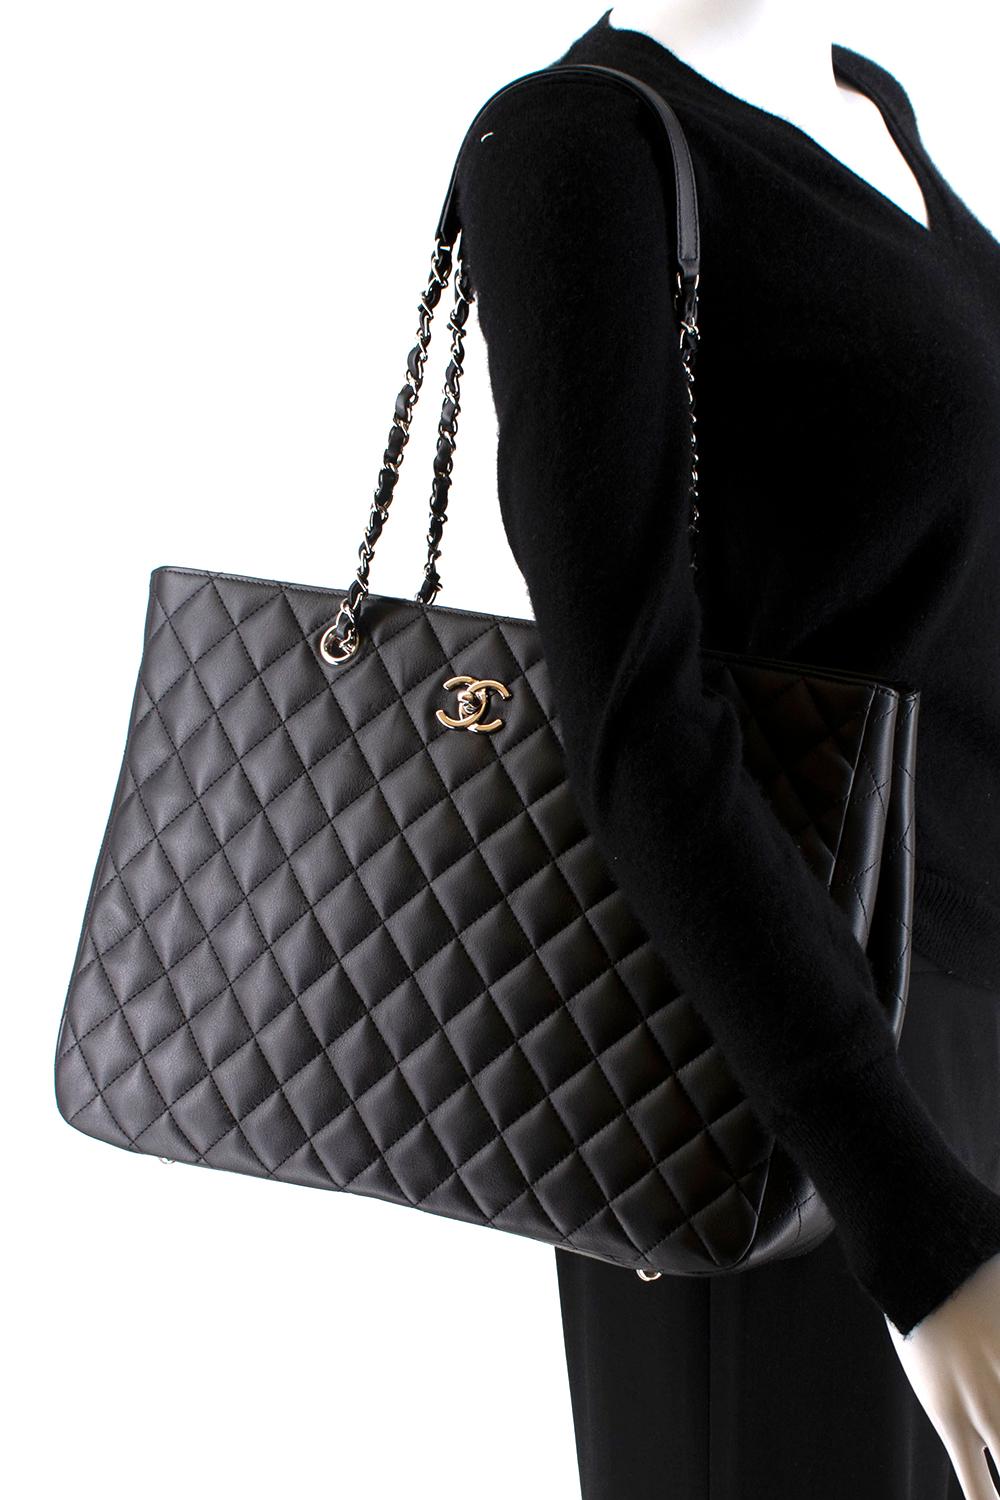 Chanel Black Lambskin Classic Shopping Tote For Sale 1